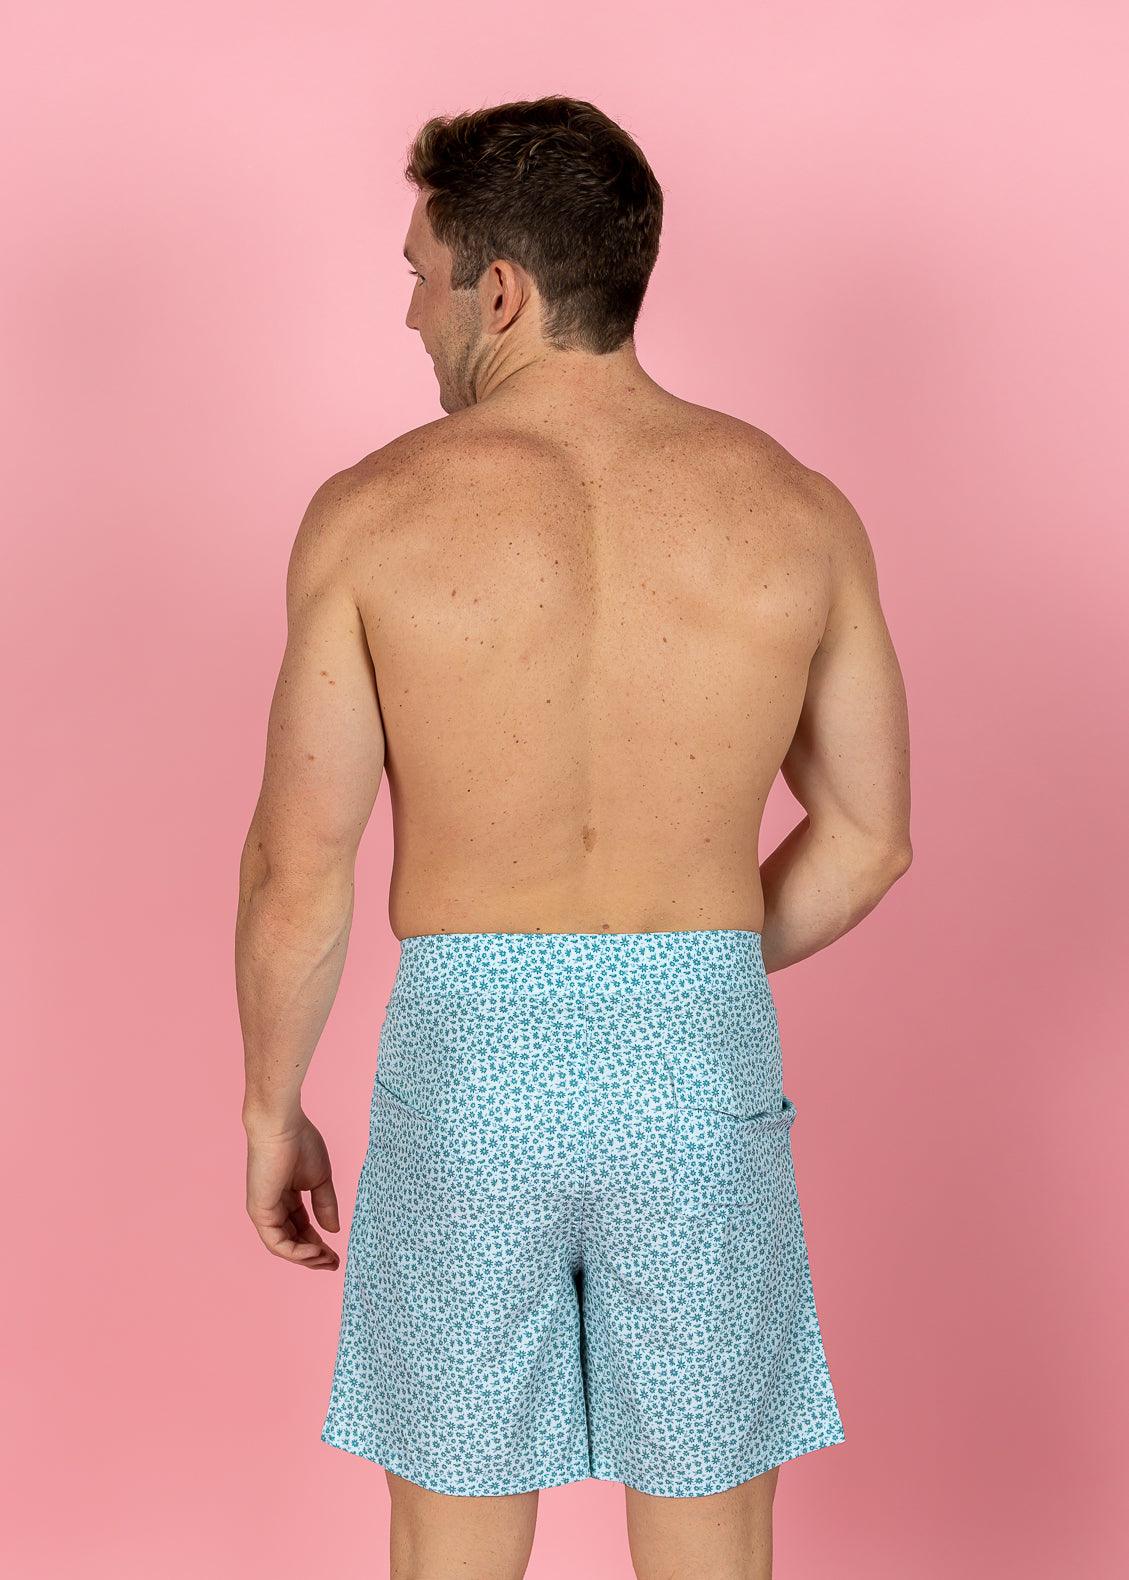 Mens Swimsuit - Trunks - Blue Ditsy Floral